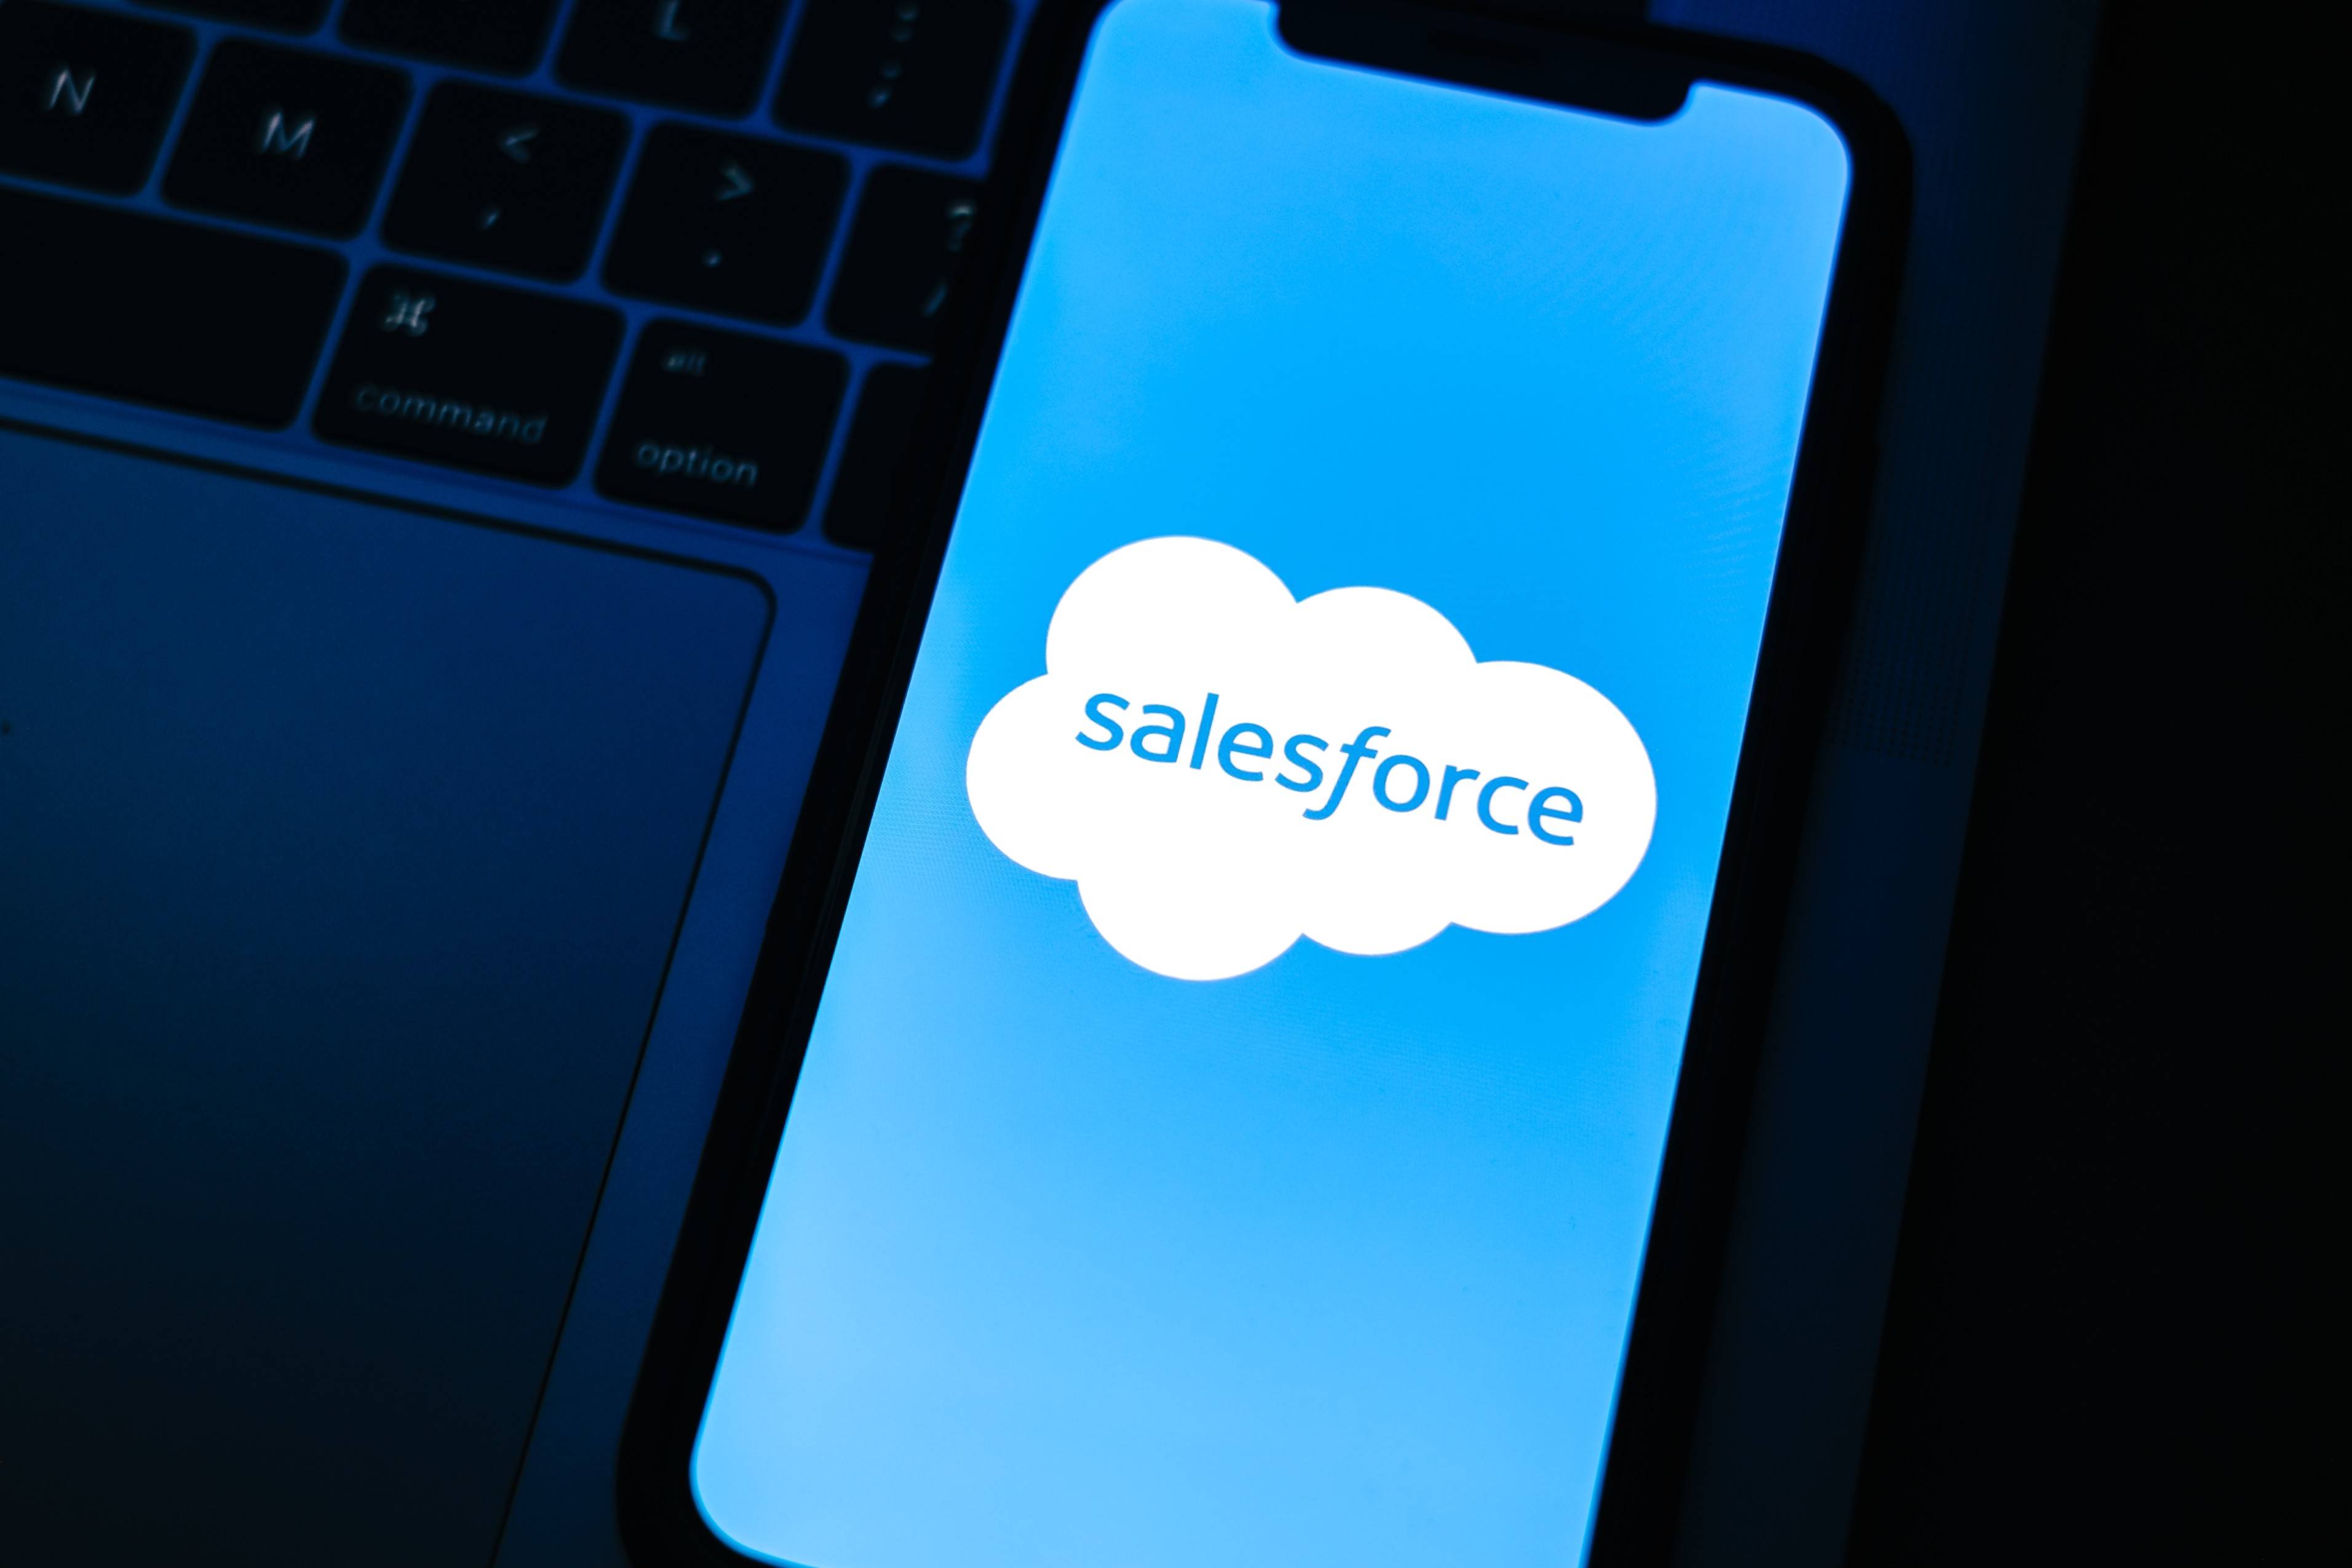 How To Get 7 Free Licenses For Non-Profits From Salesforce.org